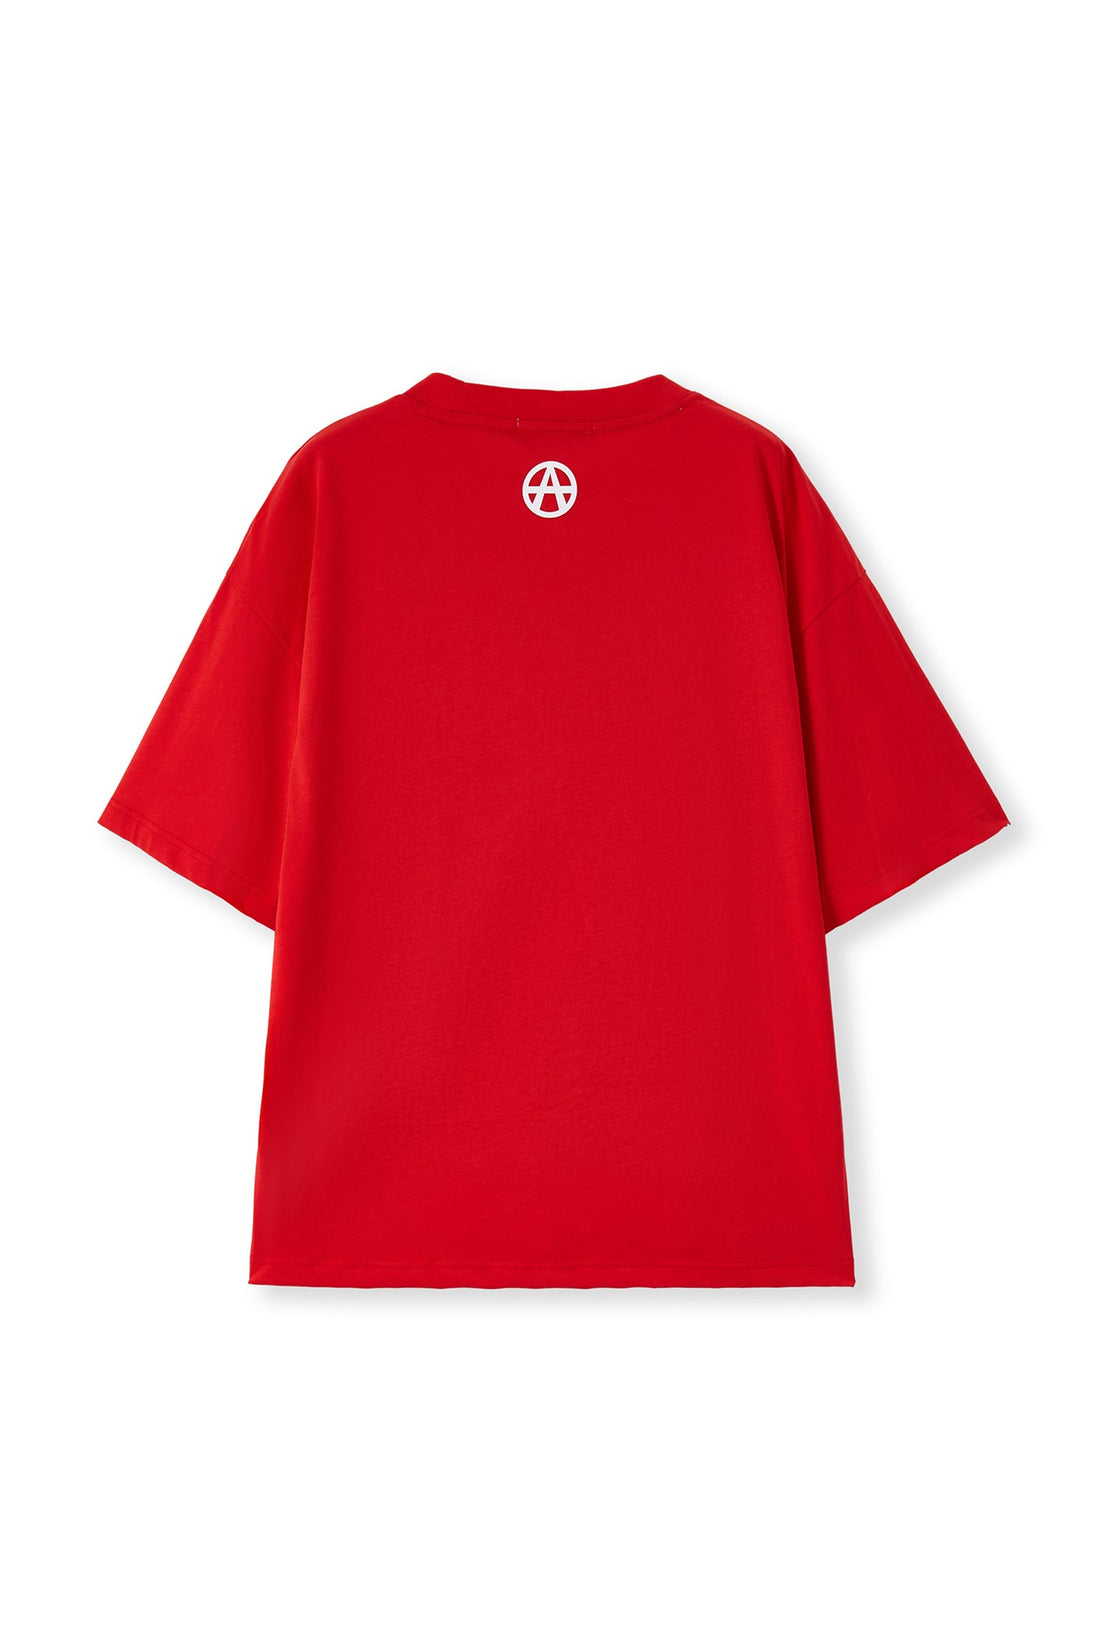 UNCOVER TSHIRT RED Acupuncture